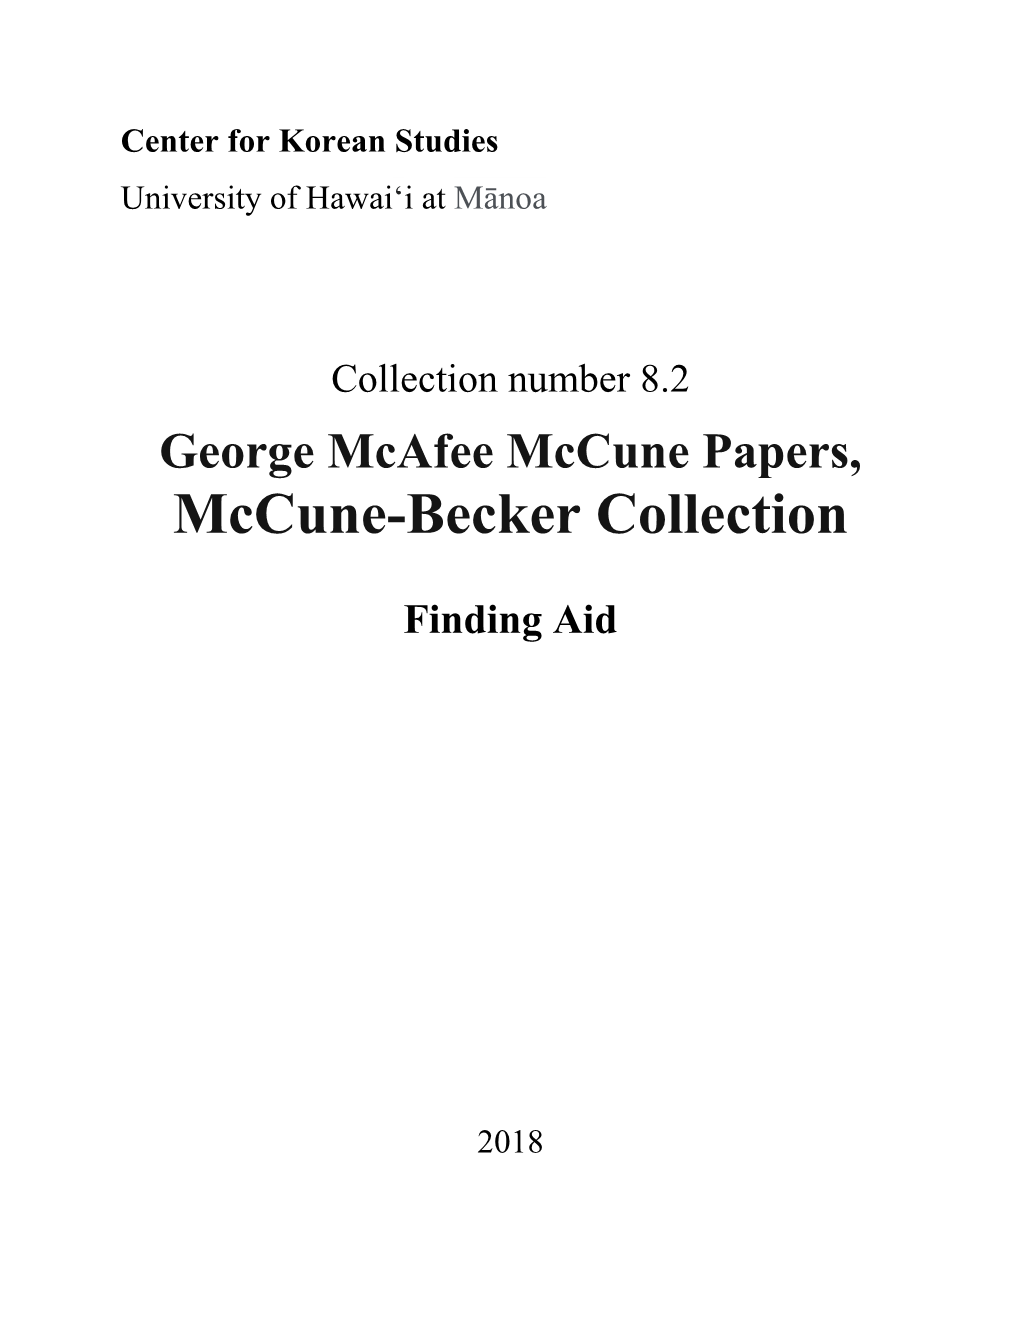 George Mcafee Mccune Paper Finding Aid Part 1 09012020